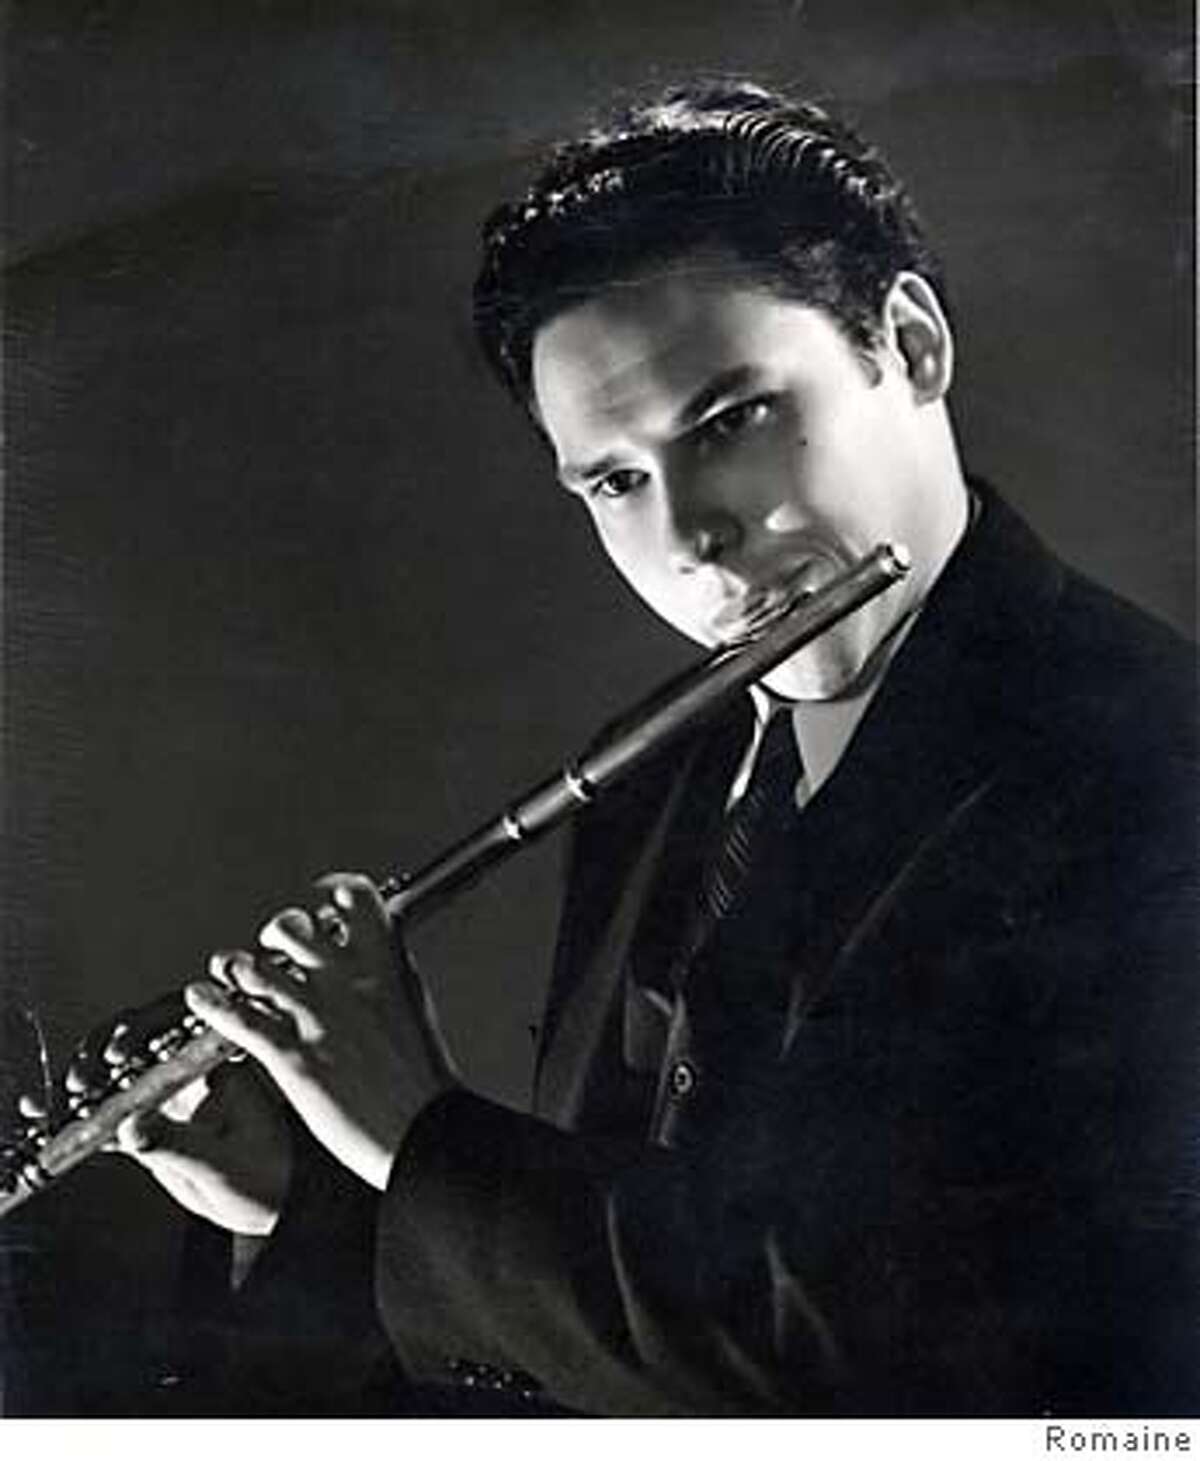 May 1947 Paul Renzi, show at age 21. Solo Flutist with the San Francisco Symphony Photo by Romaine 220 Jones St. San Francisco Ran on: 07-26-2004 Paul Renzi plays his last concert this week.